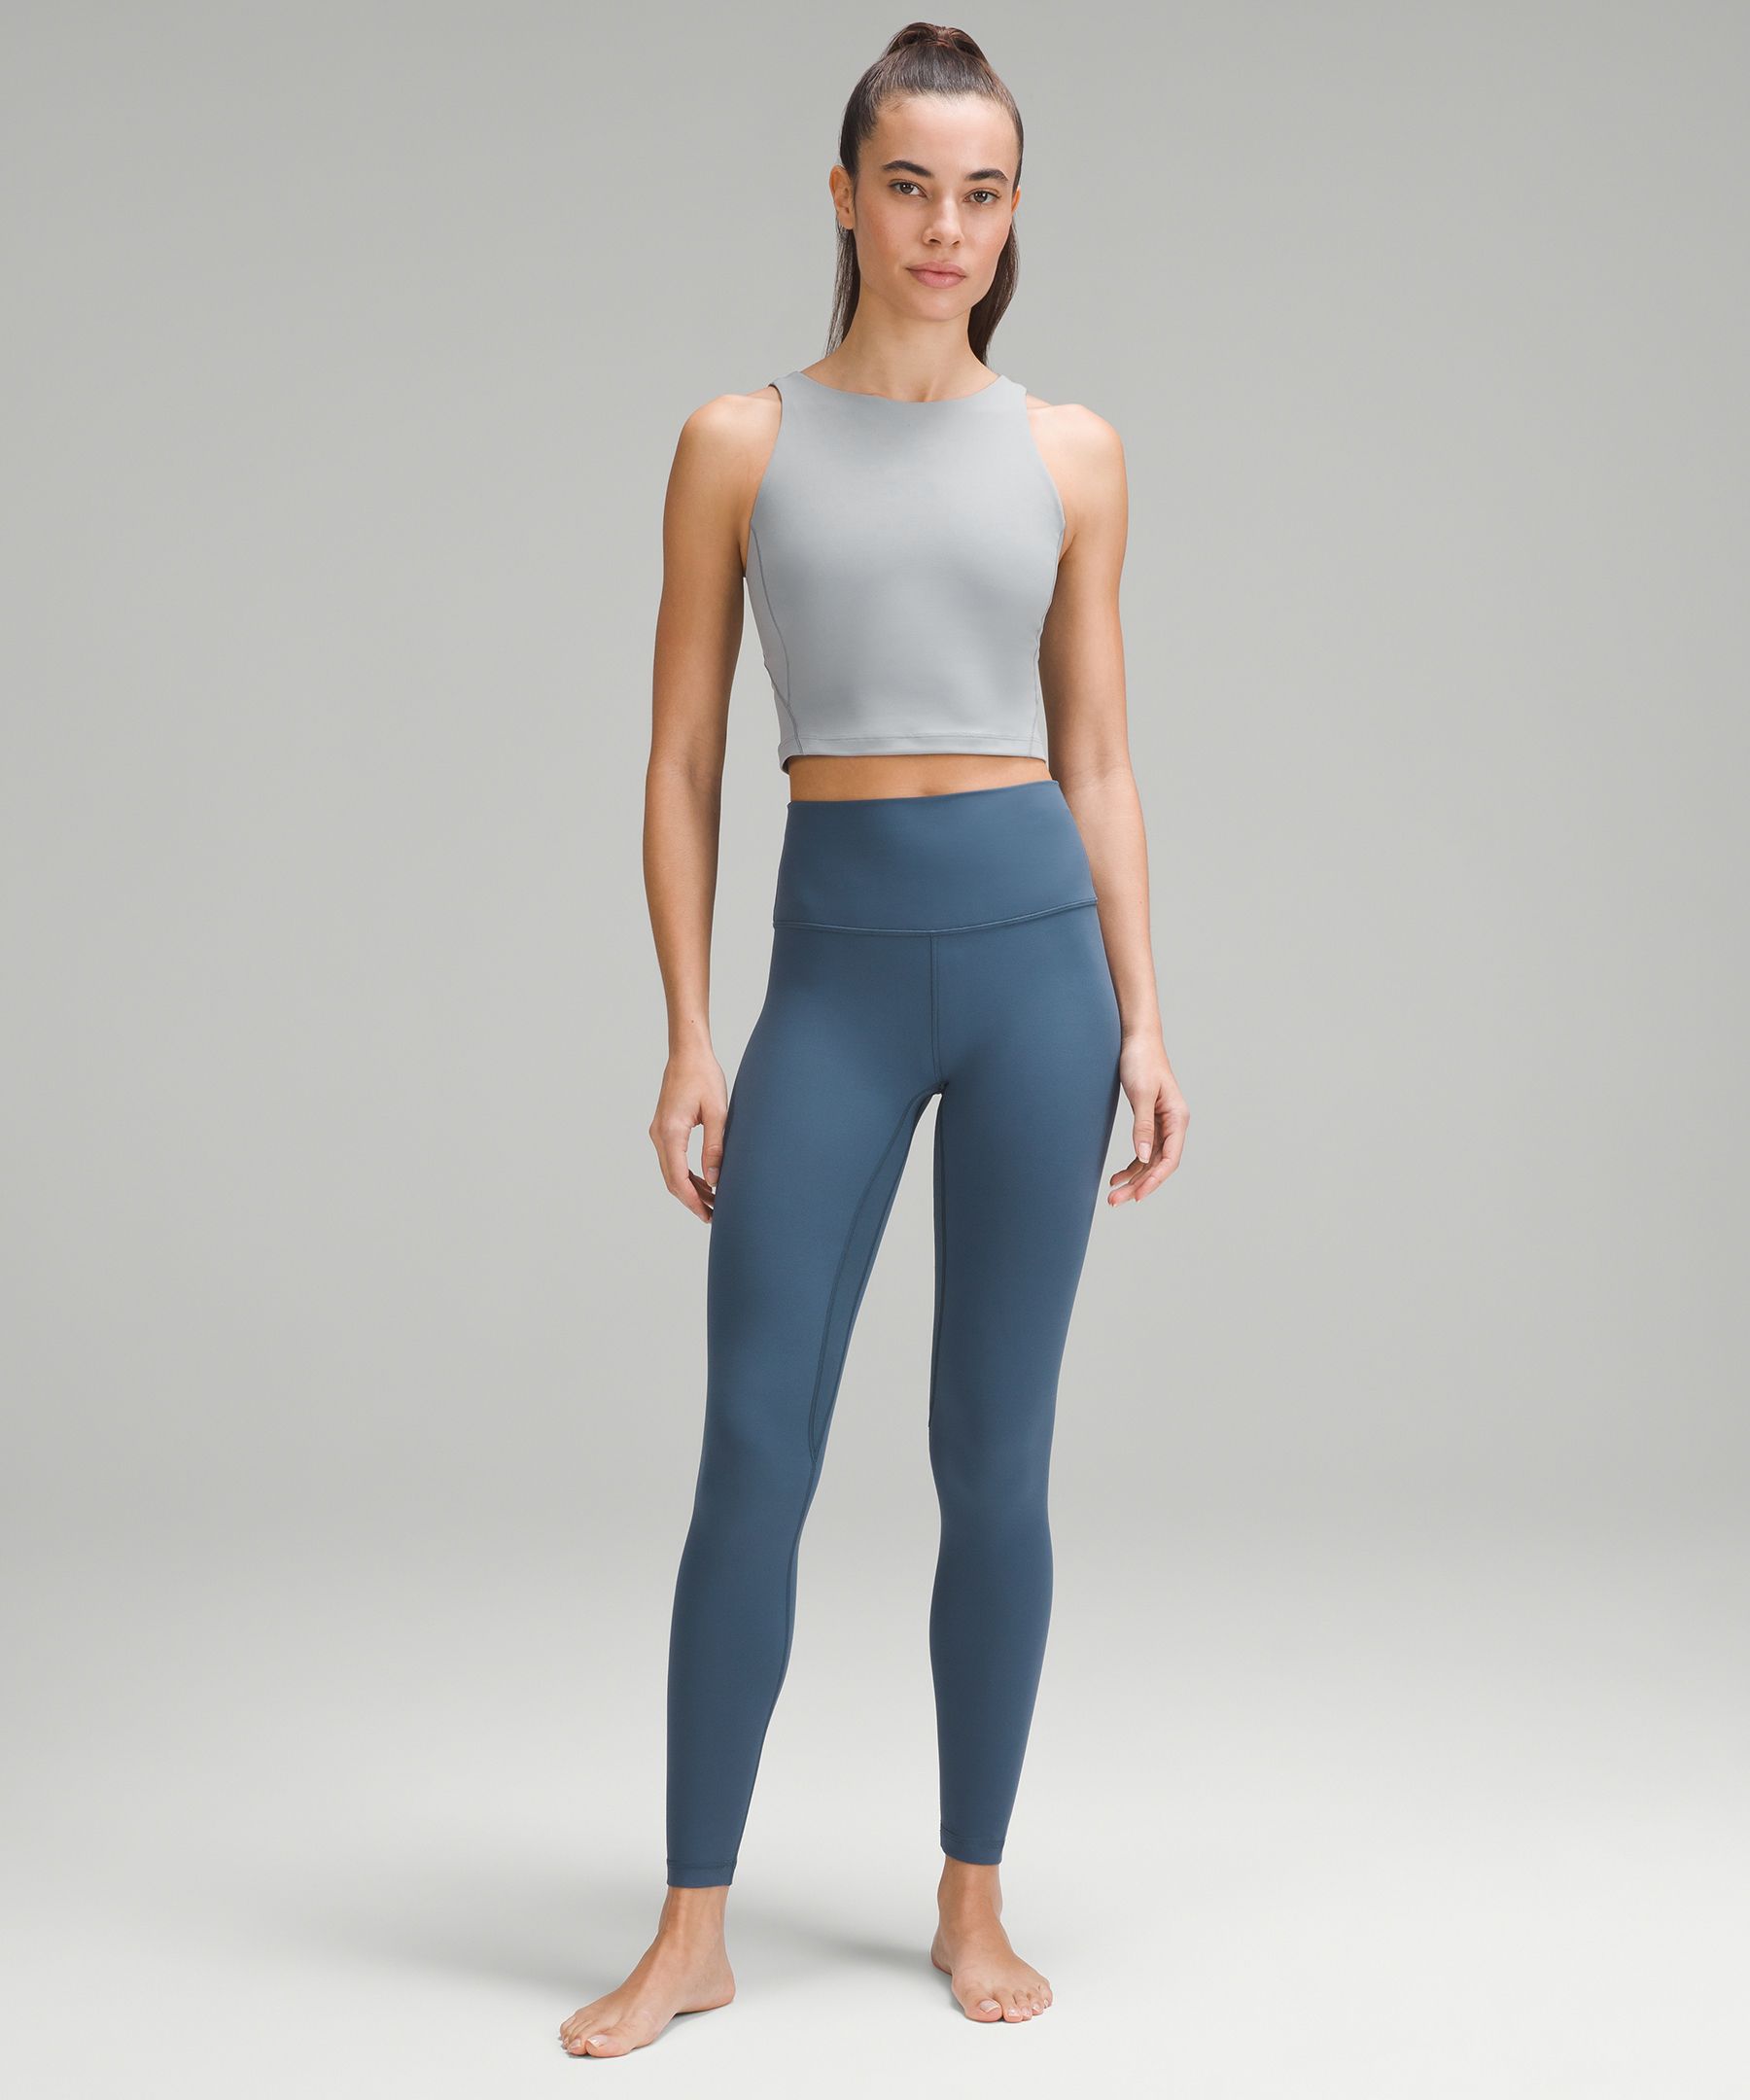 New with tag! Lululemon Align High Rise legging (size 10) 23, Women's -  Bottoms, City of Halifax